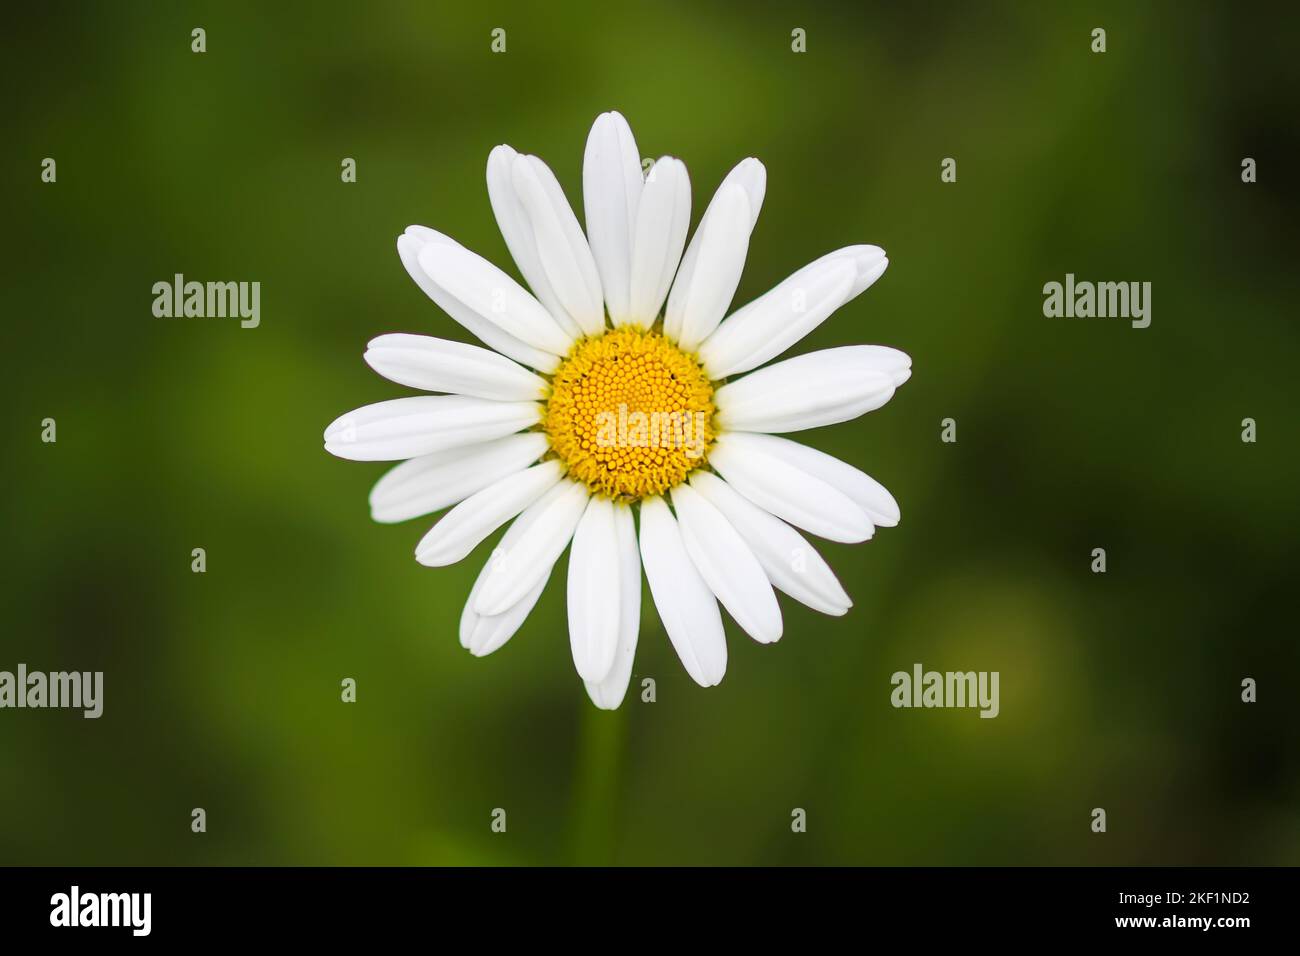 White daisy flower on green nature background. Summer wildflowers close up. Stock Photo